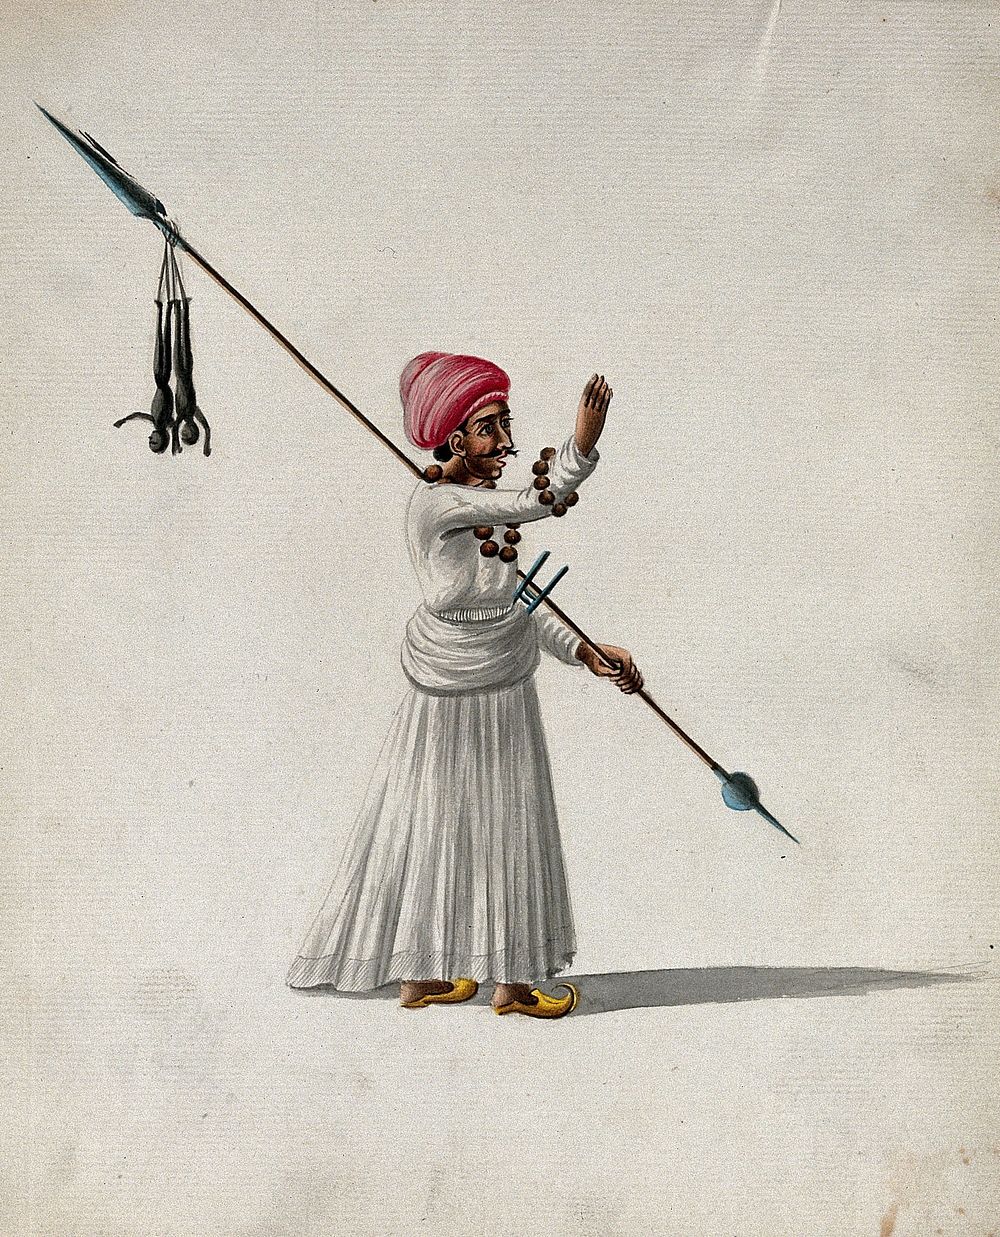 A man holding a spear with two puppets  hanging from one end, calls out to someone. Gouache painting by an Indian artist.